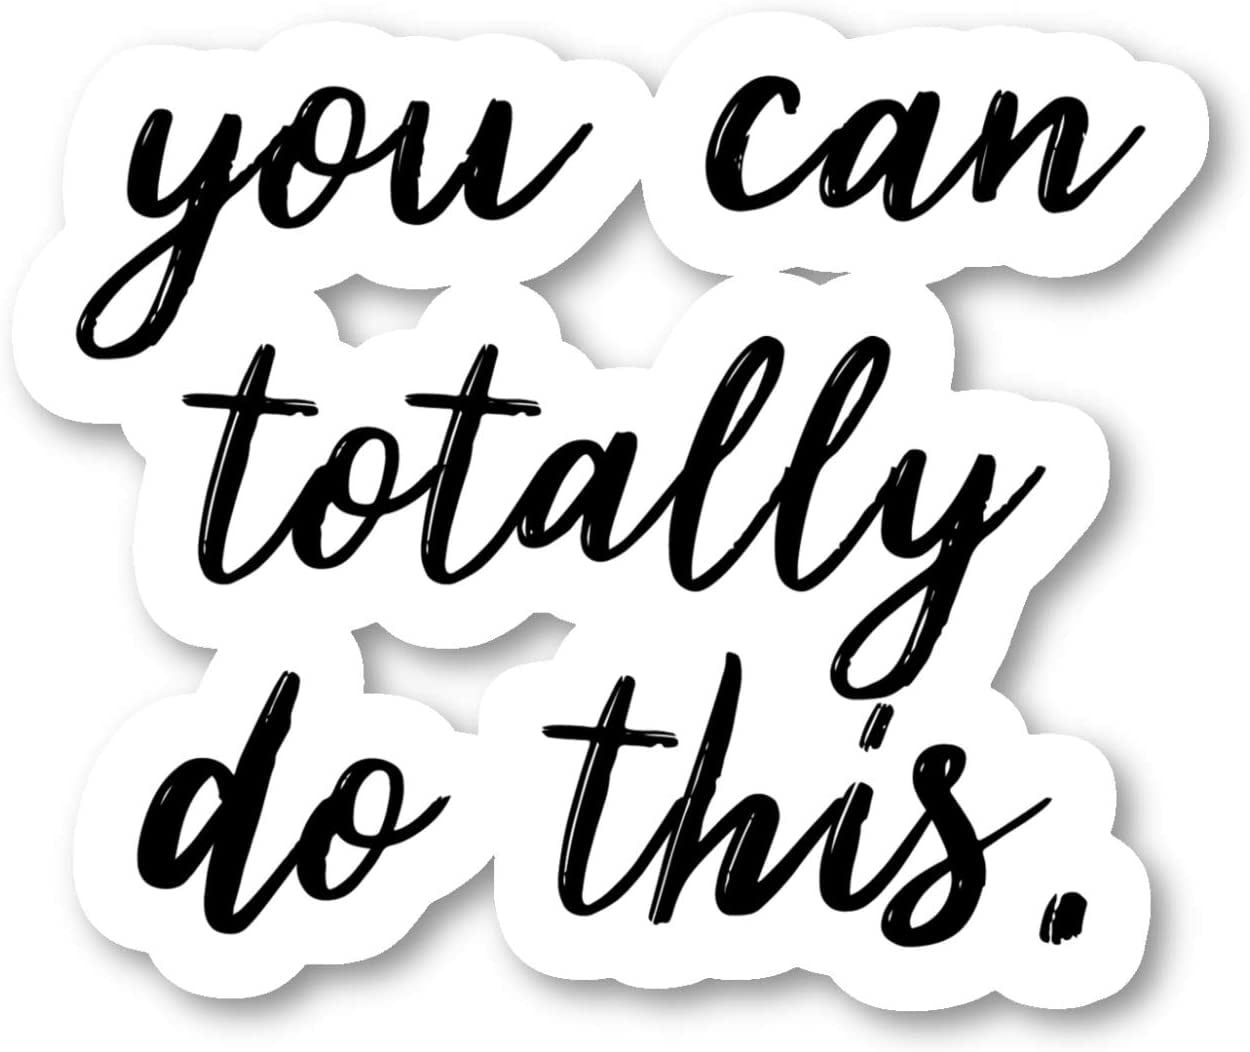 You Got This Sticker Inspirational Stickers - Laptop Stickers - 2.5 Vinyl  Decal - Laptop, Phone, Tablet Vinyl Decal Sticker S183124